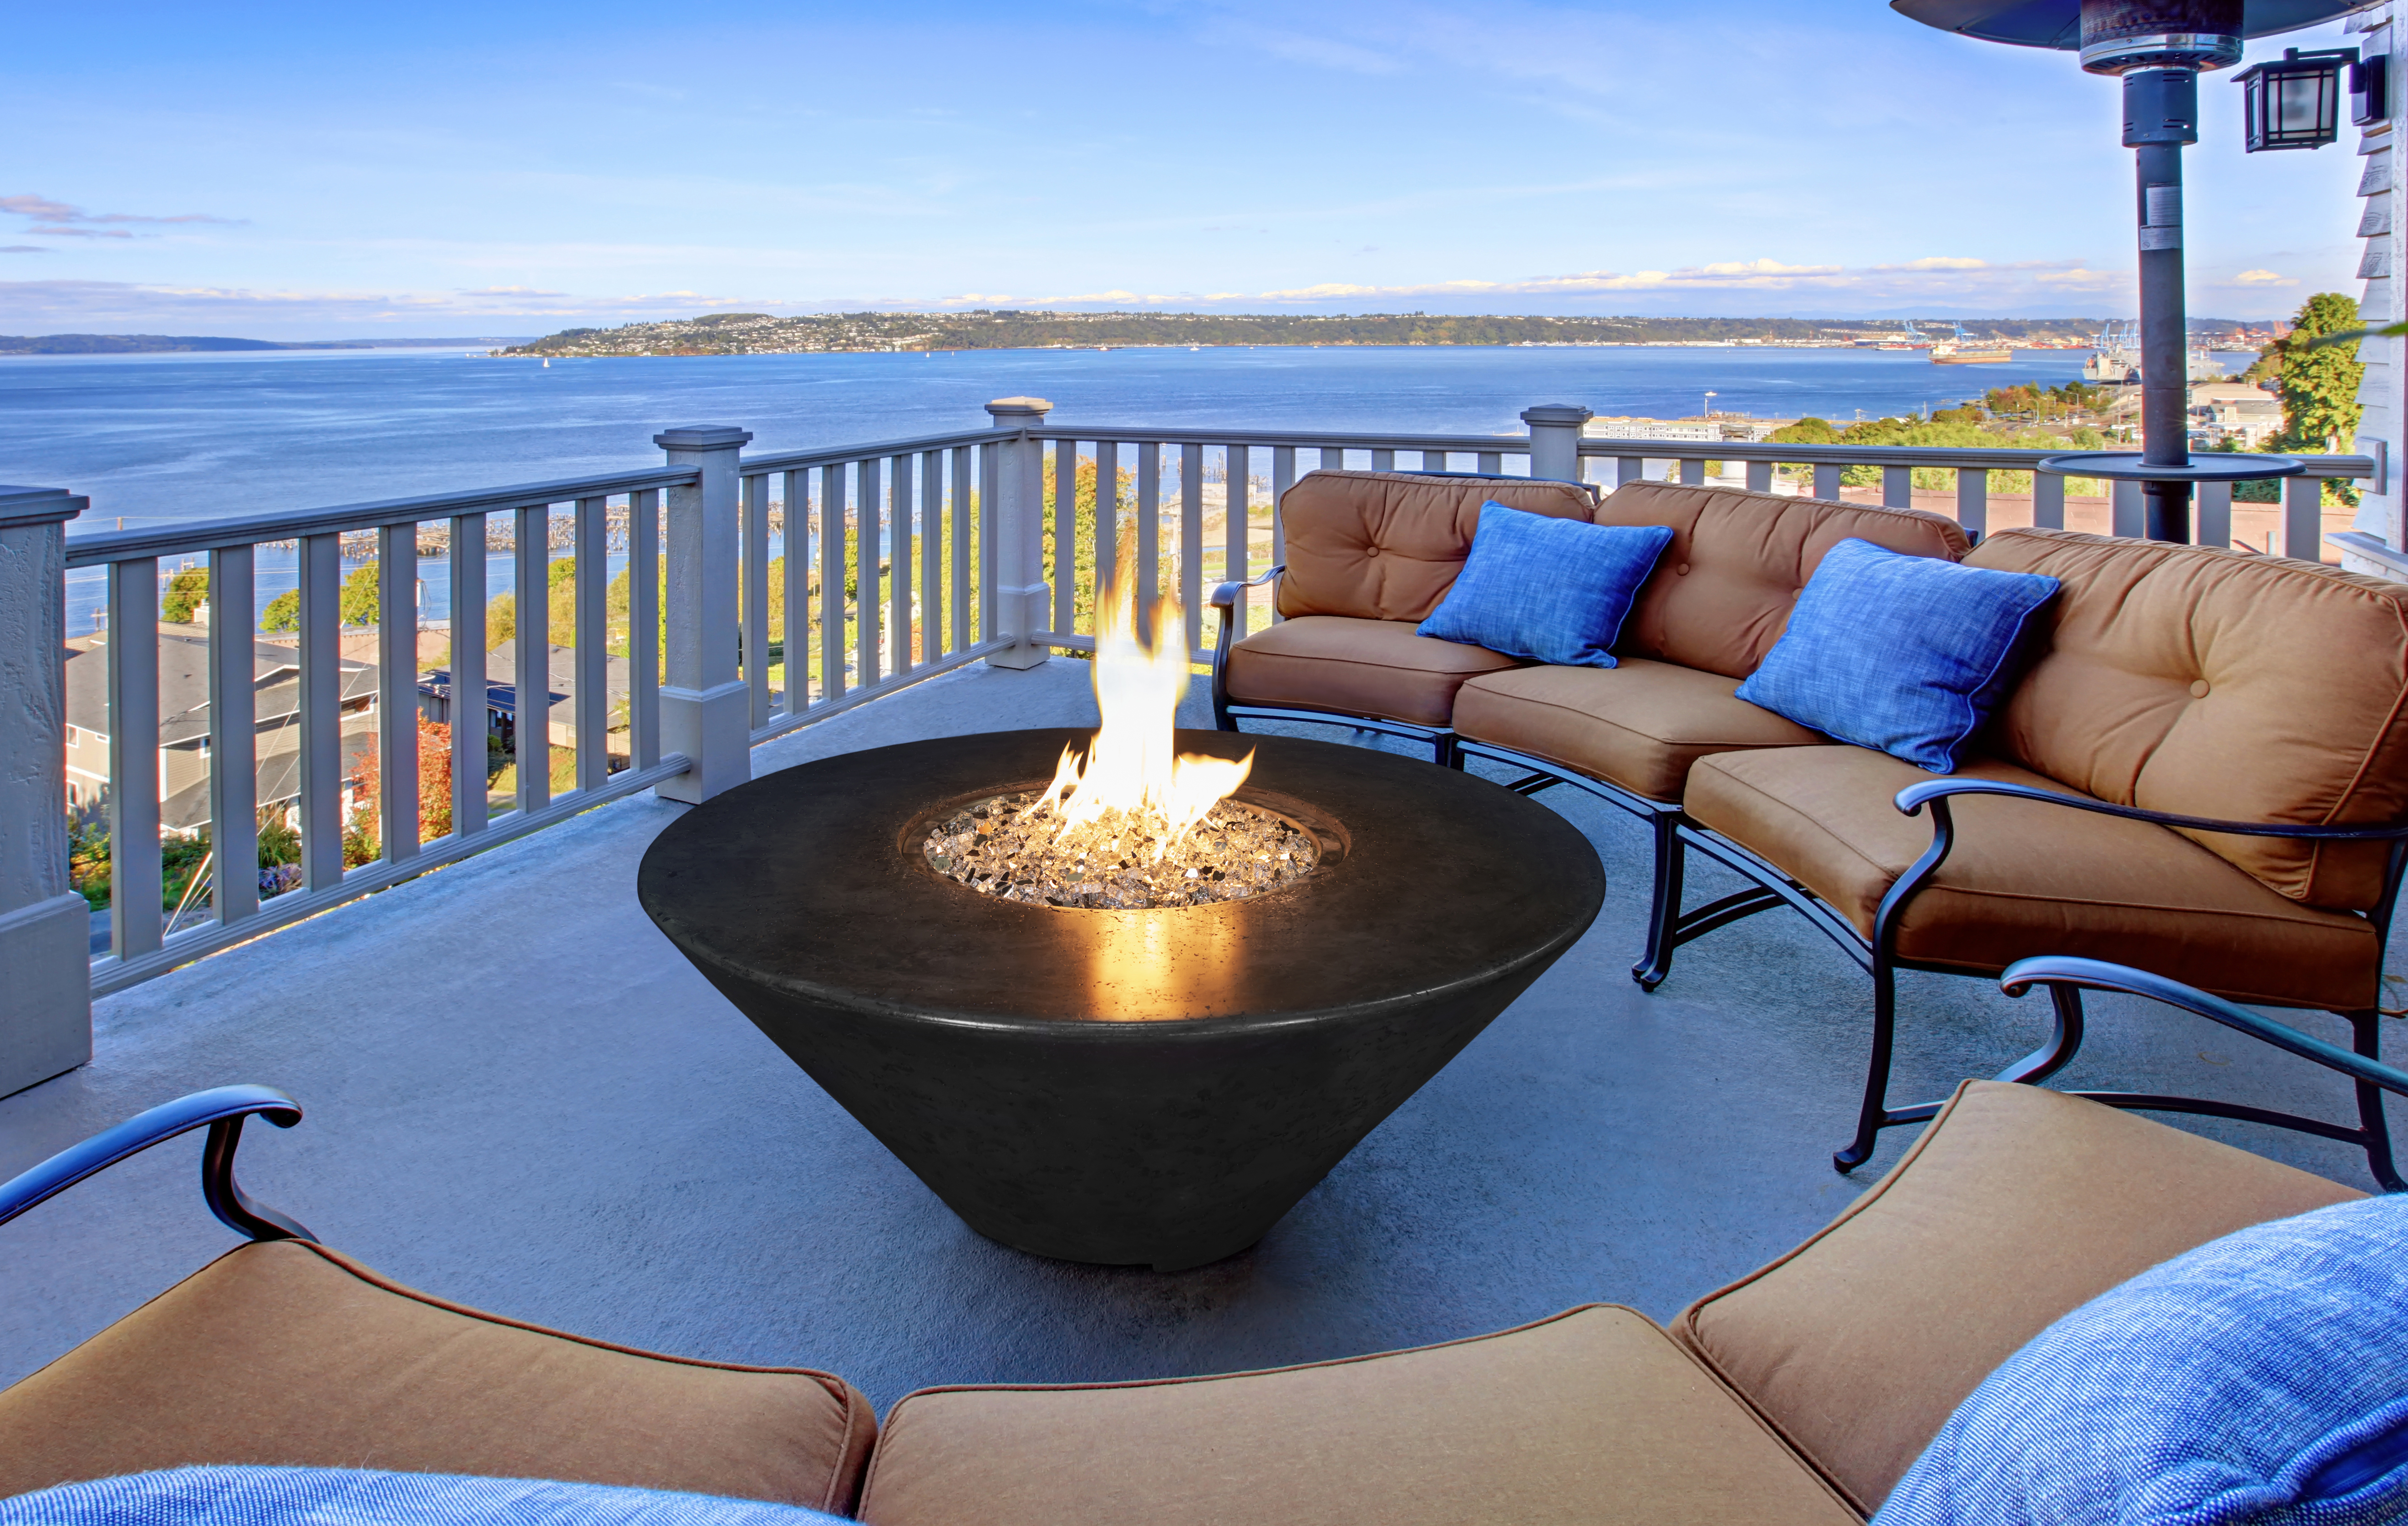 Outdoor Products, Gas Grills, Fire Tables, Outdoor Fireplaces, Outdoor Kitchens, TrueFlame, TrueFlame gas grills